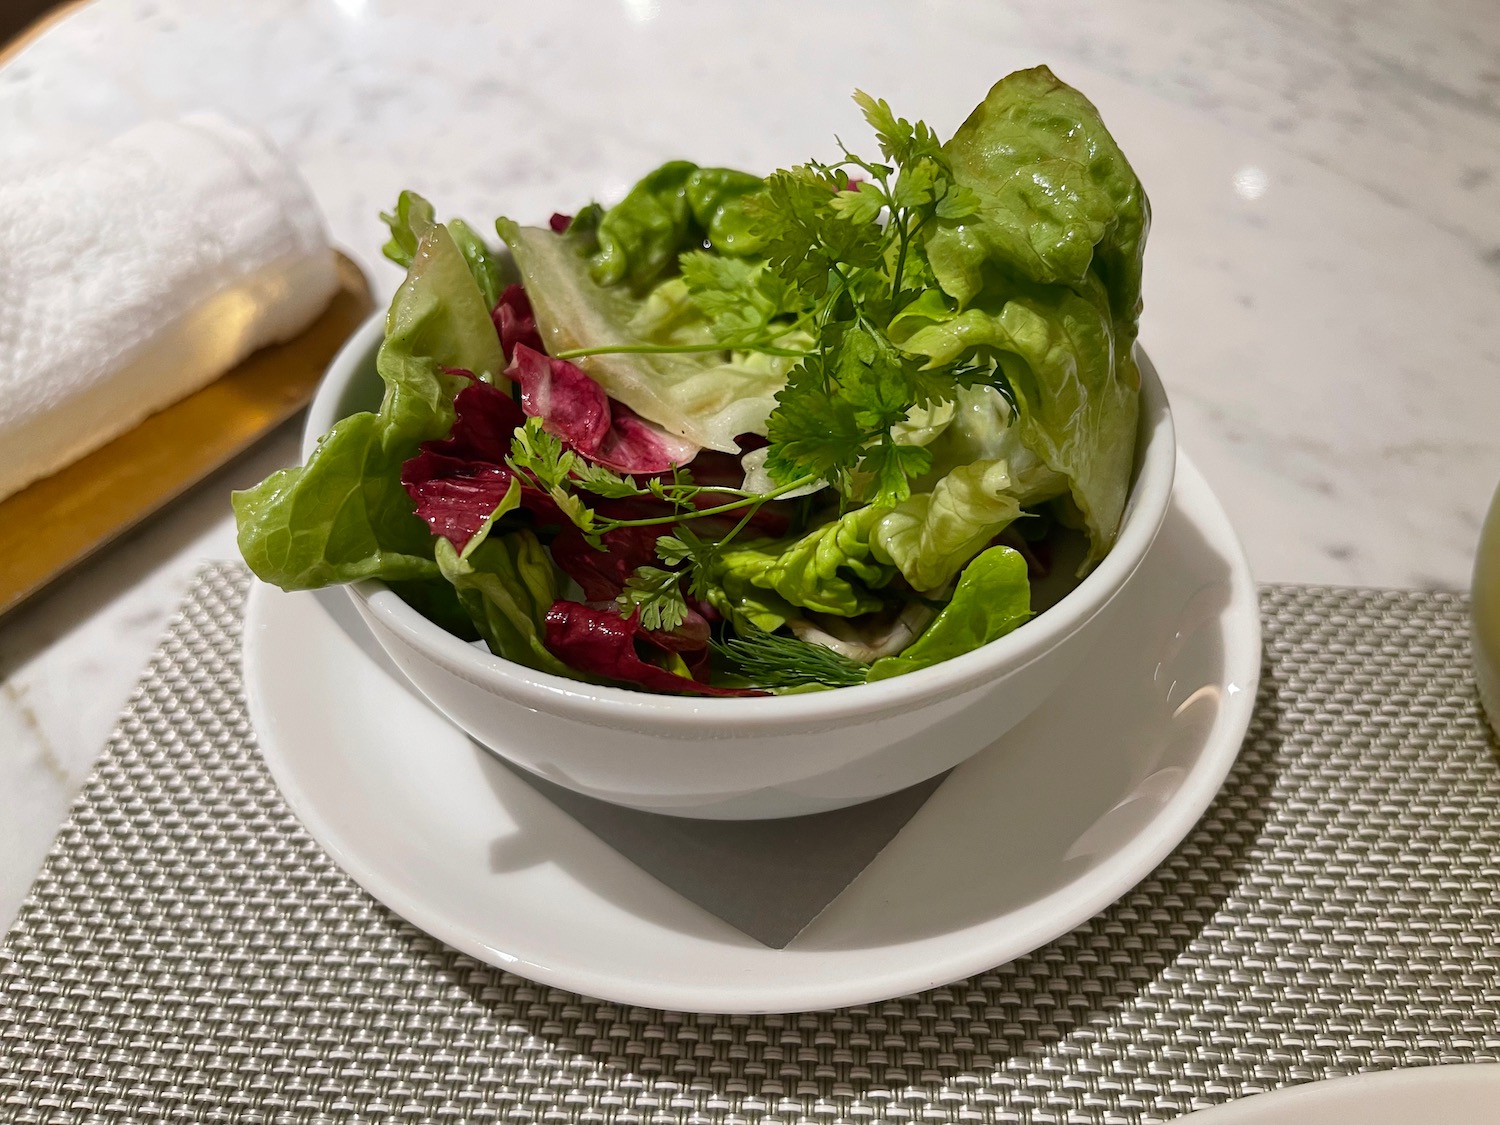 a bowl of salad on a plate